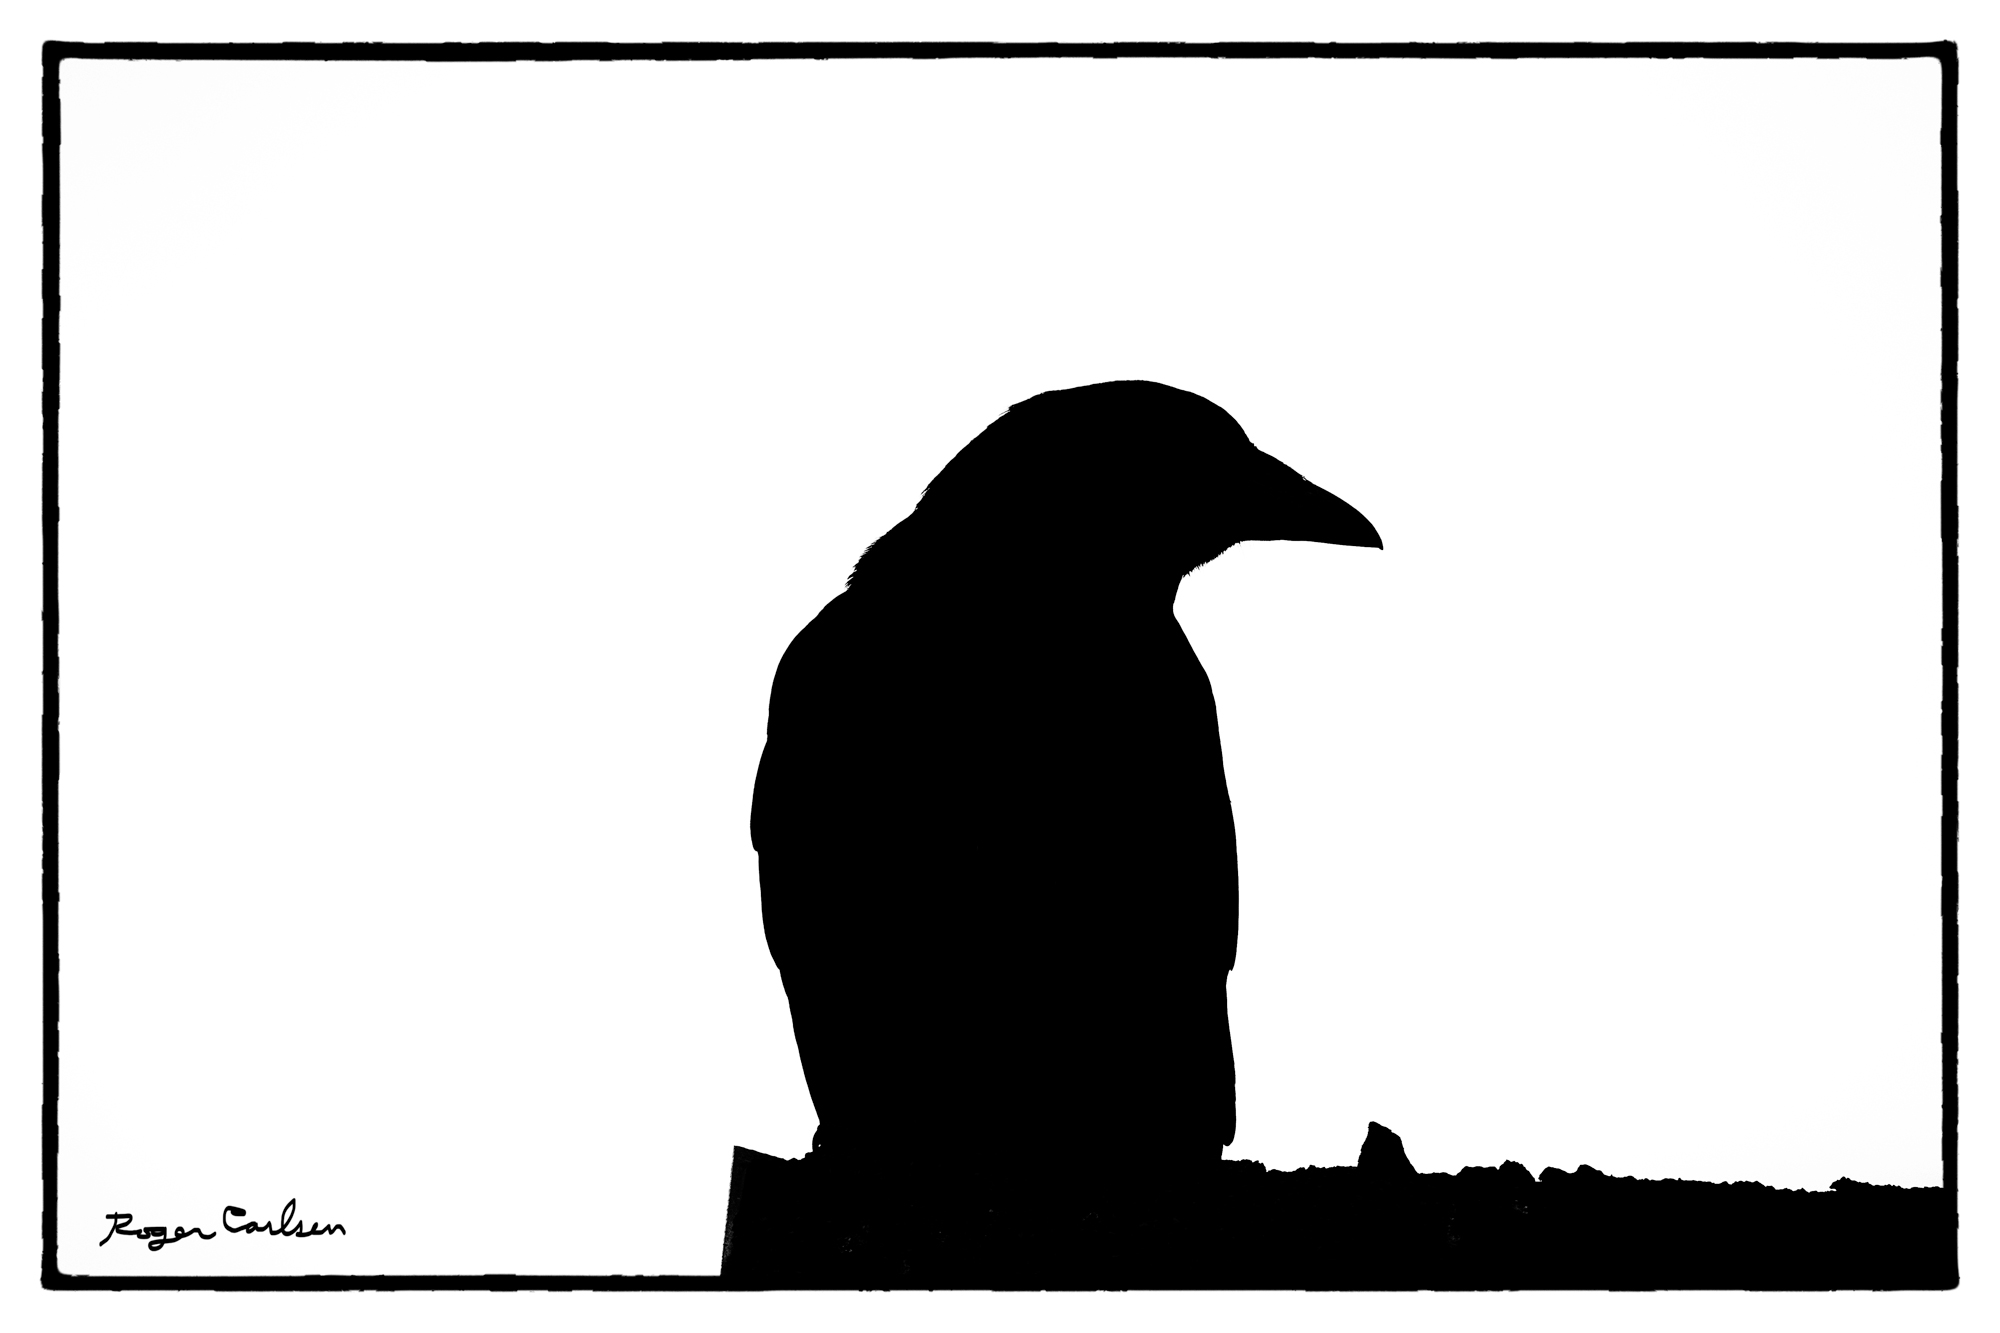 Crow by Roger Carlsen